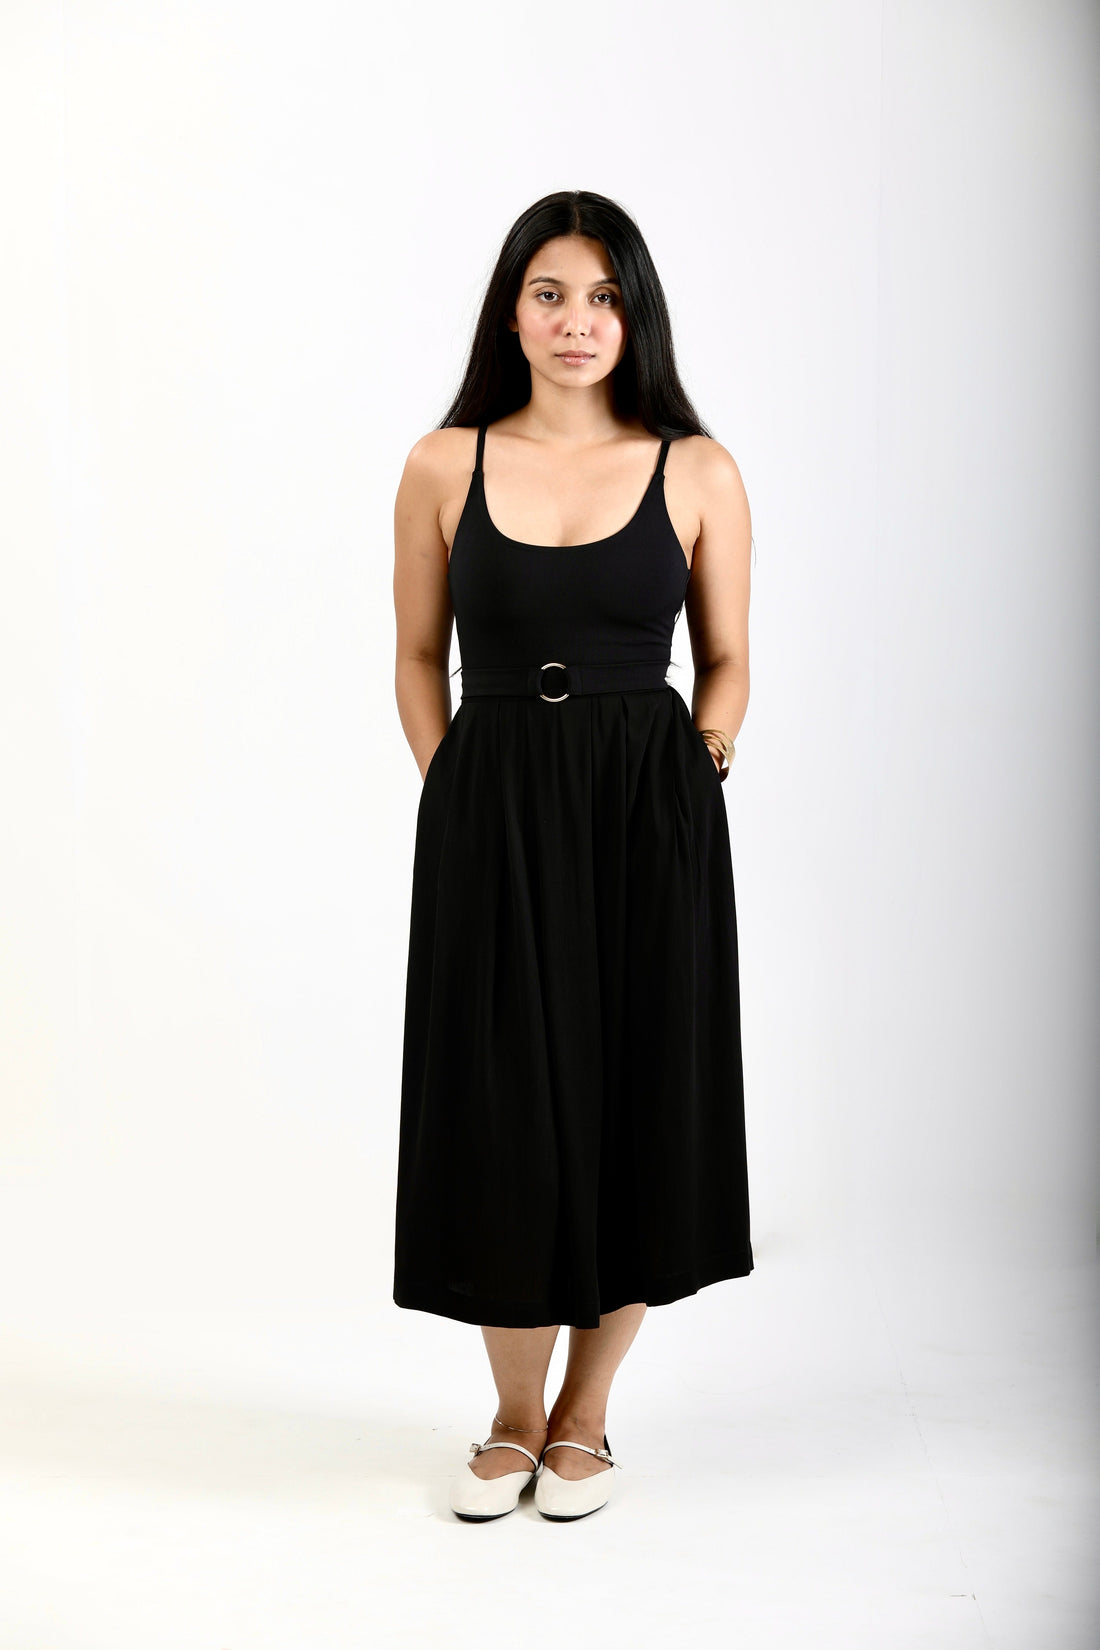 Pleated Skirt with Pockets - Black